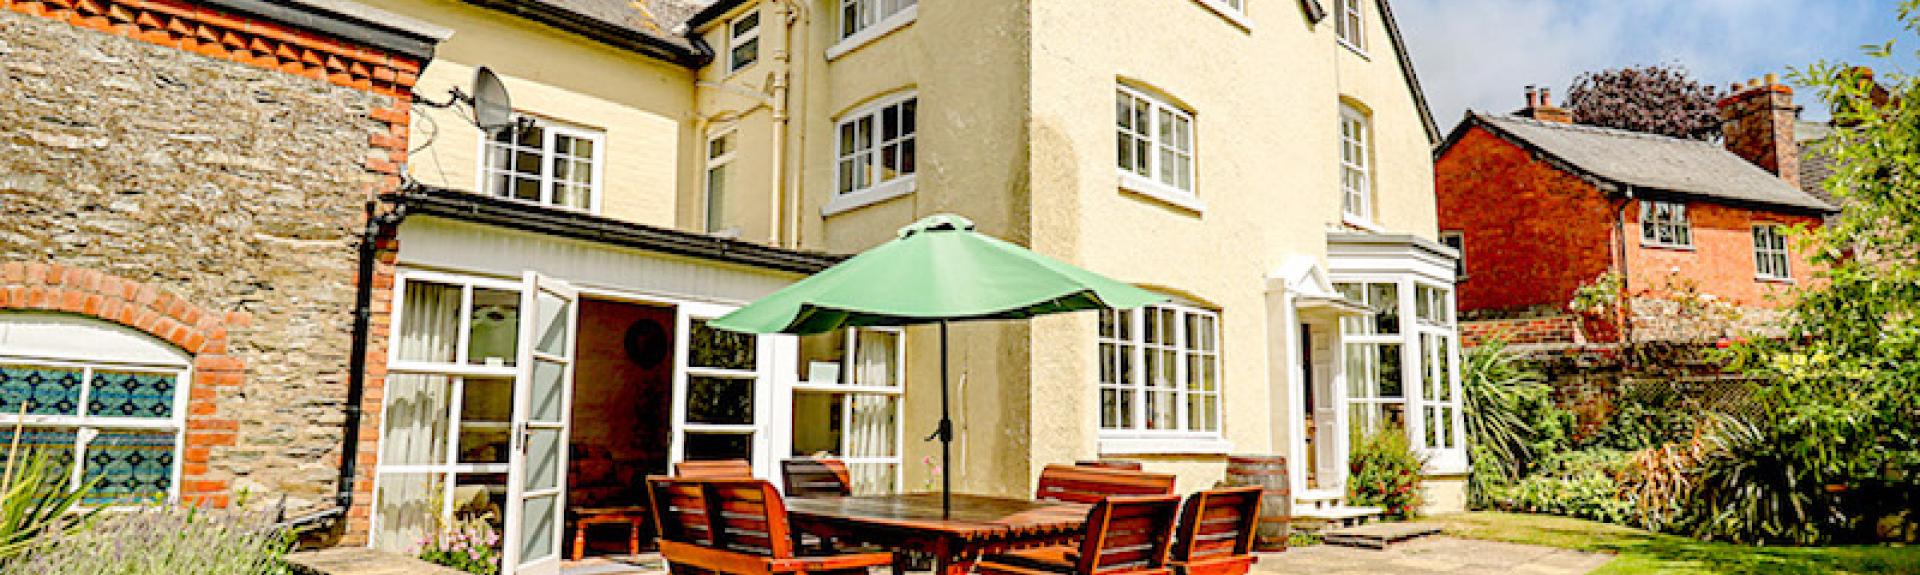 3 storey exterior of a large modern Shropshire holiday home with outdoor dining facilities and a large laen.